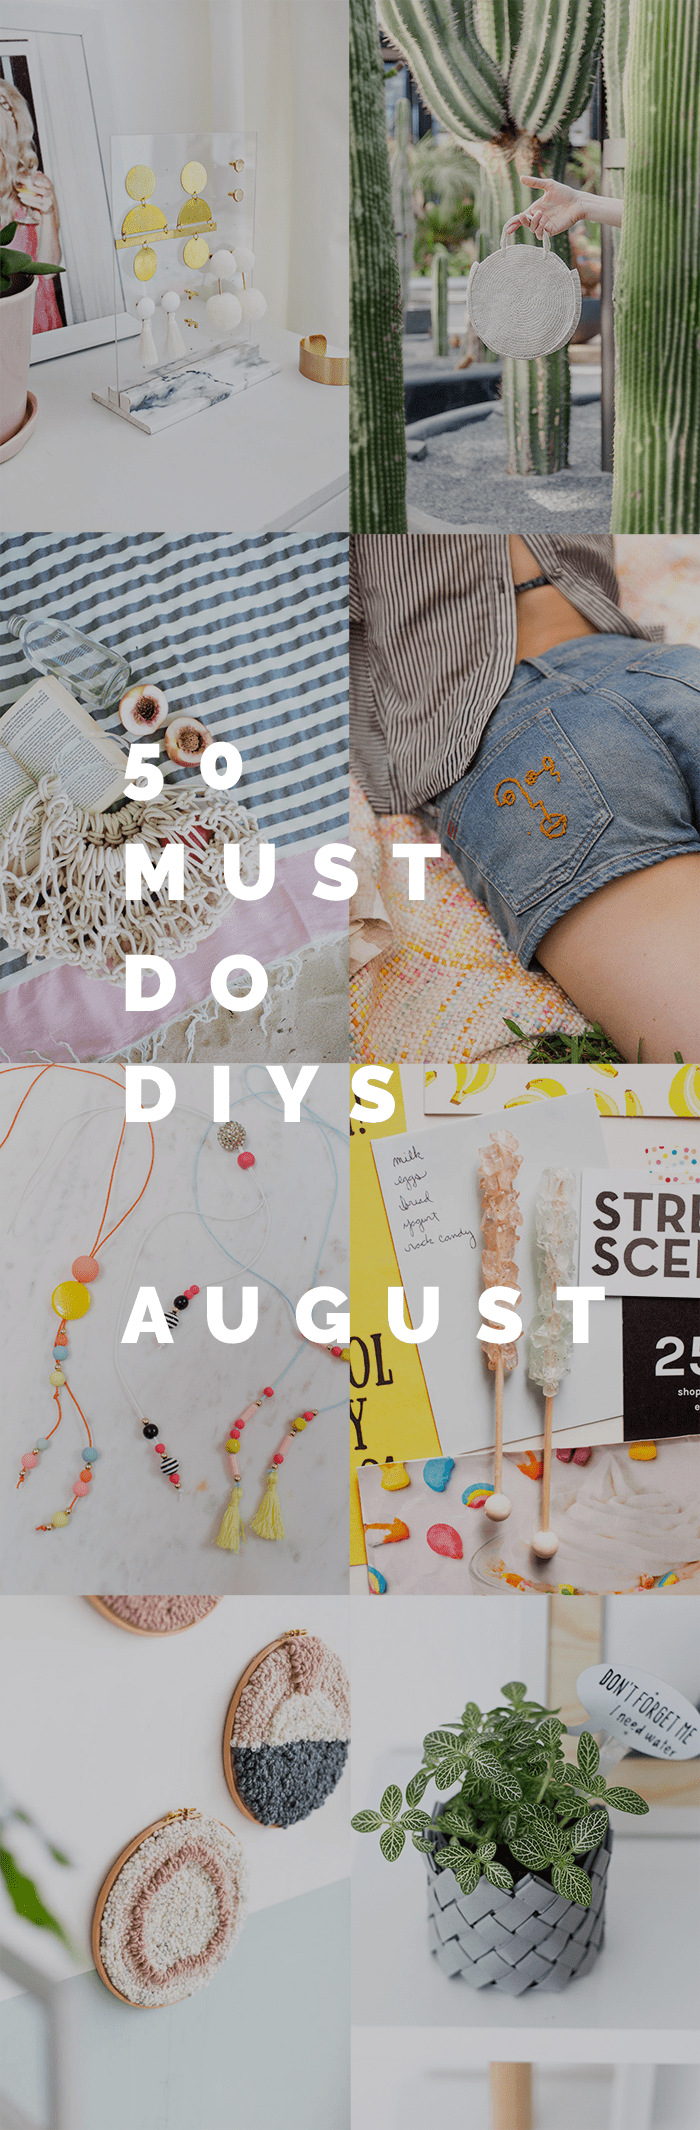 50 Must Do DIY's August